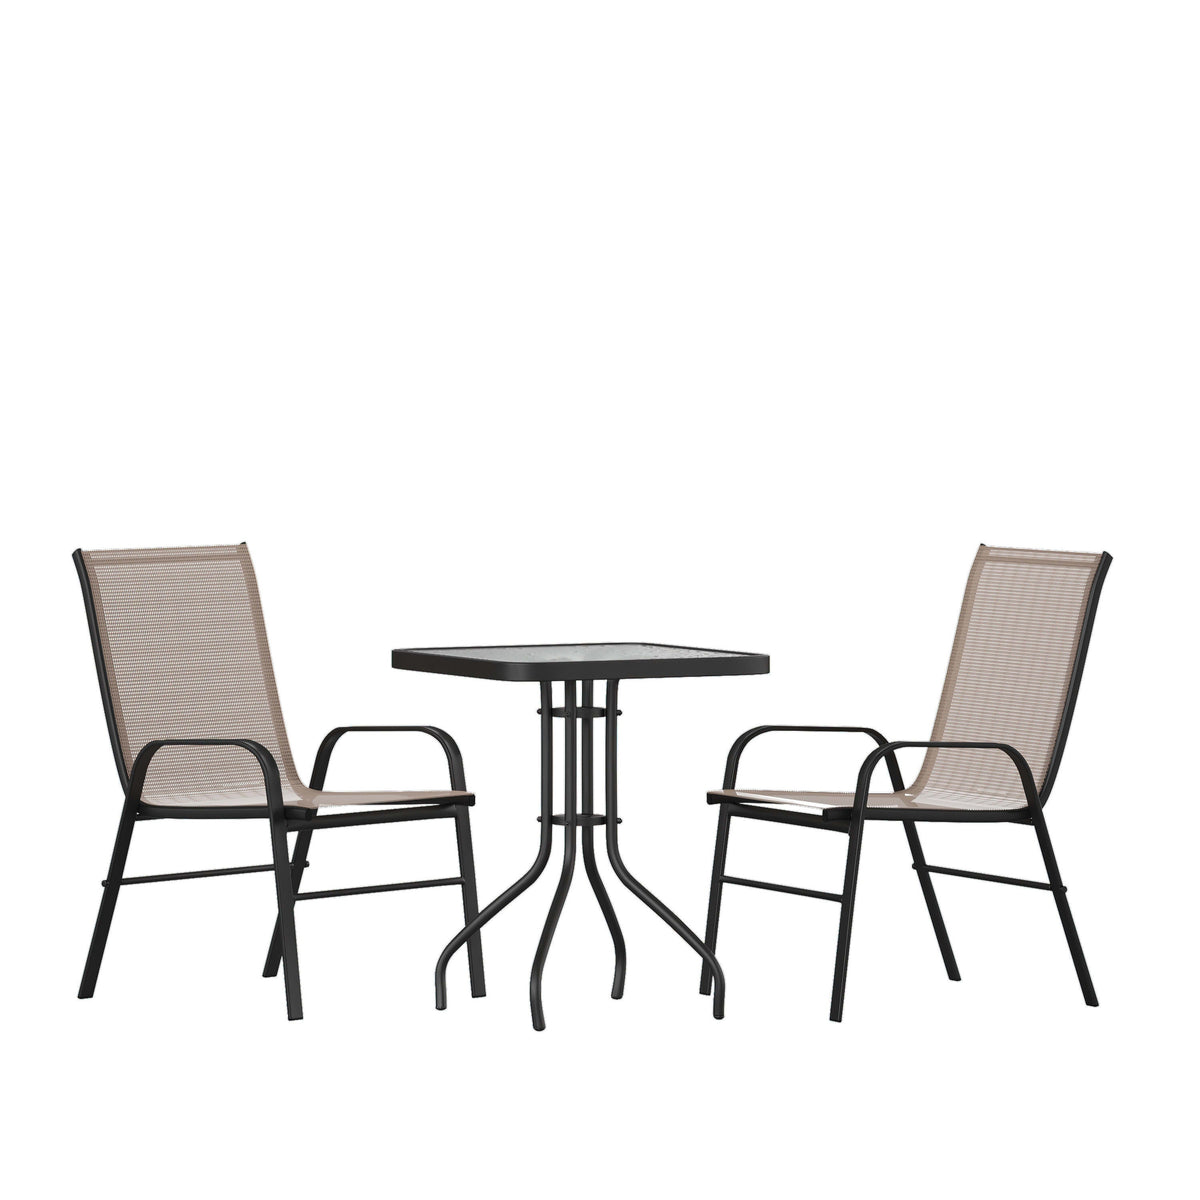 Brown |#| 3 Piece Patio Dining Set - 23.5inch Square Glass Table, 2 Brown Flex Stack Chairs